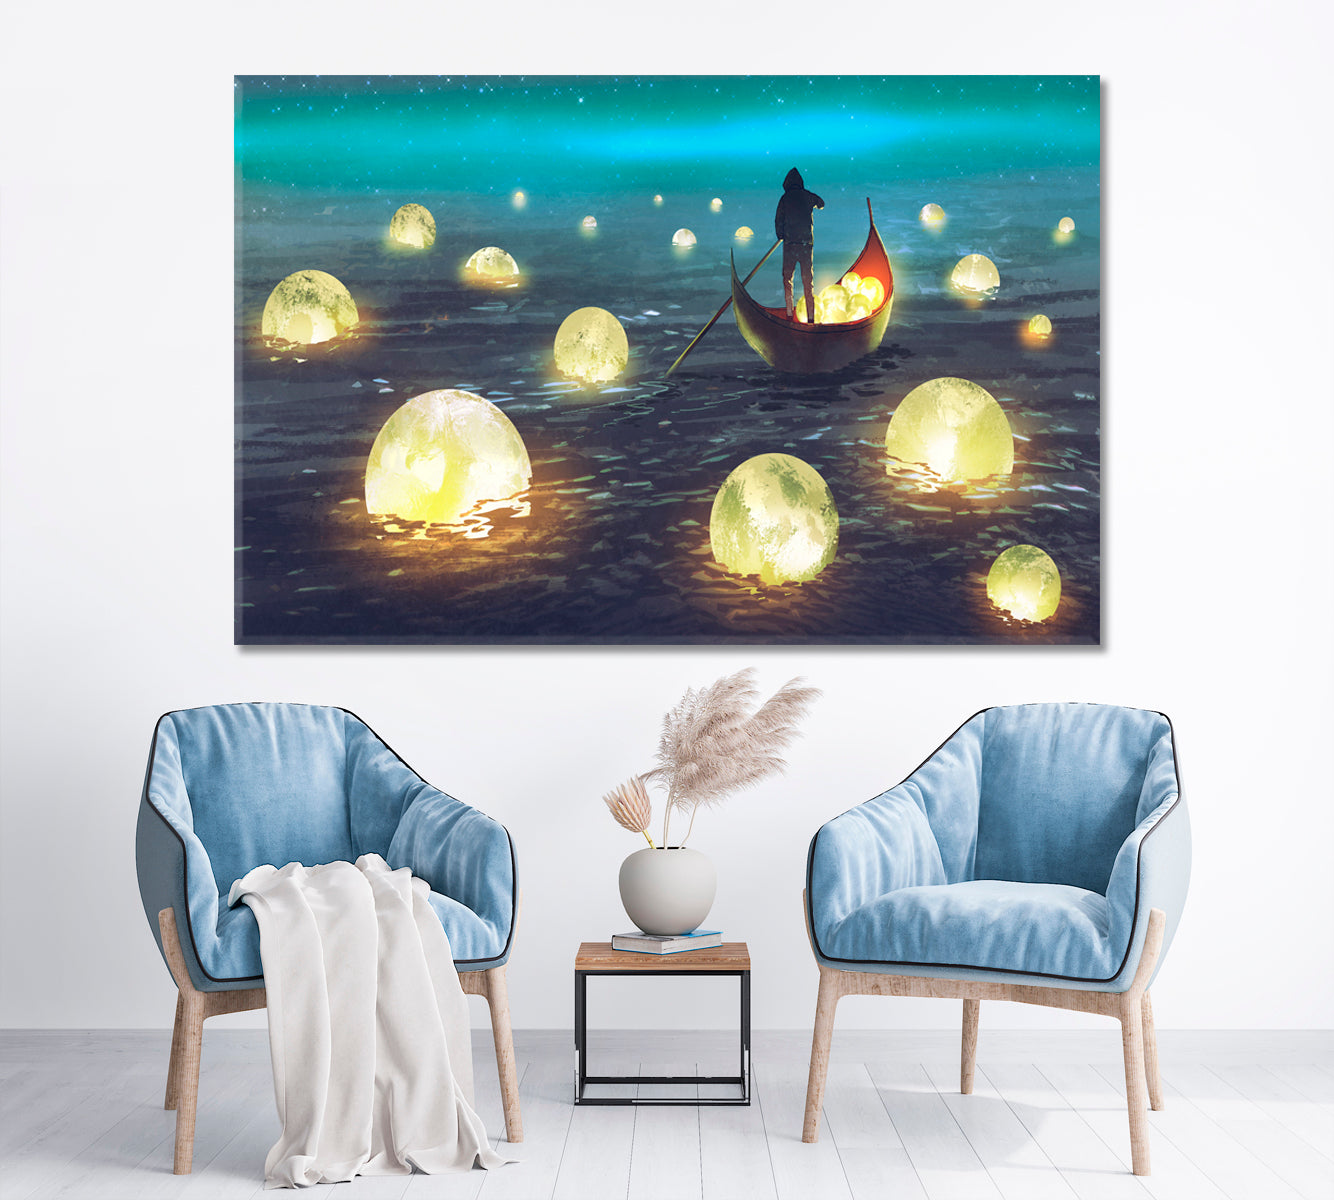 SURREAL Night Scenery Man Rowing Boat Glowing Moons Floating Sea Surreal Fantasy Large Art Print Décor Artesty   